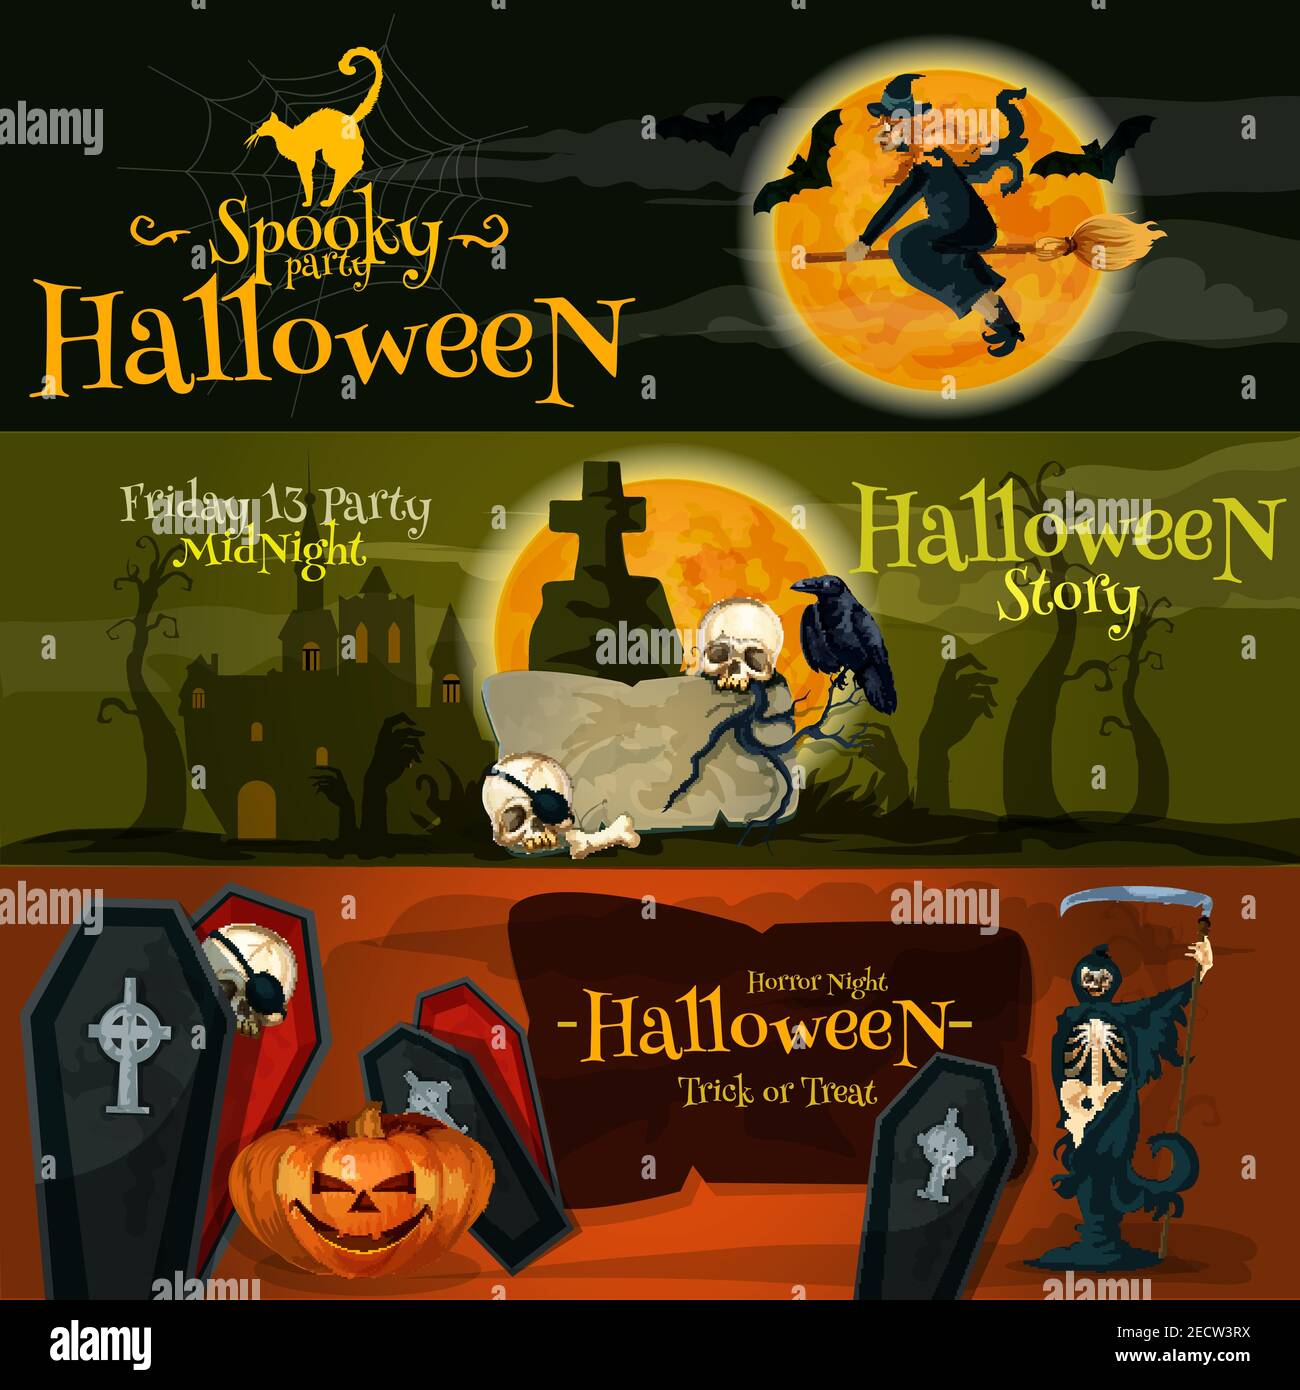 Halloween vector cartoon banner with text and characters. Spooky Halloween Party, Friday 13 midnight story, Horror Night, Trick or Treat lettering pos Stock Vector